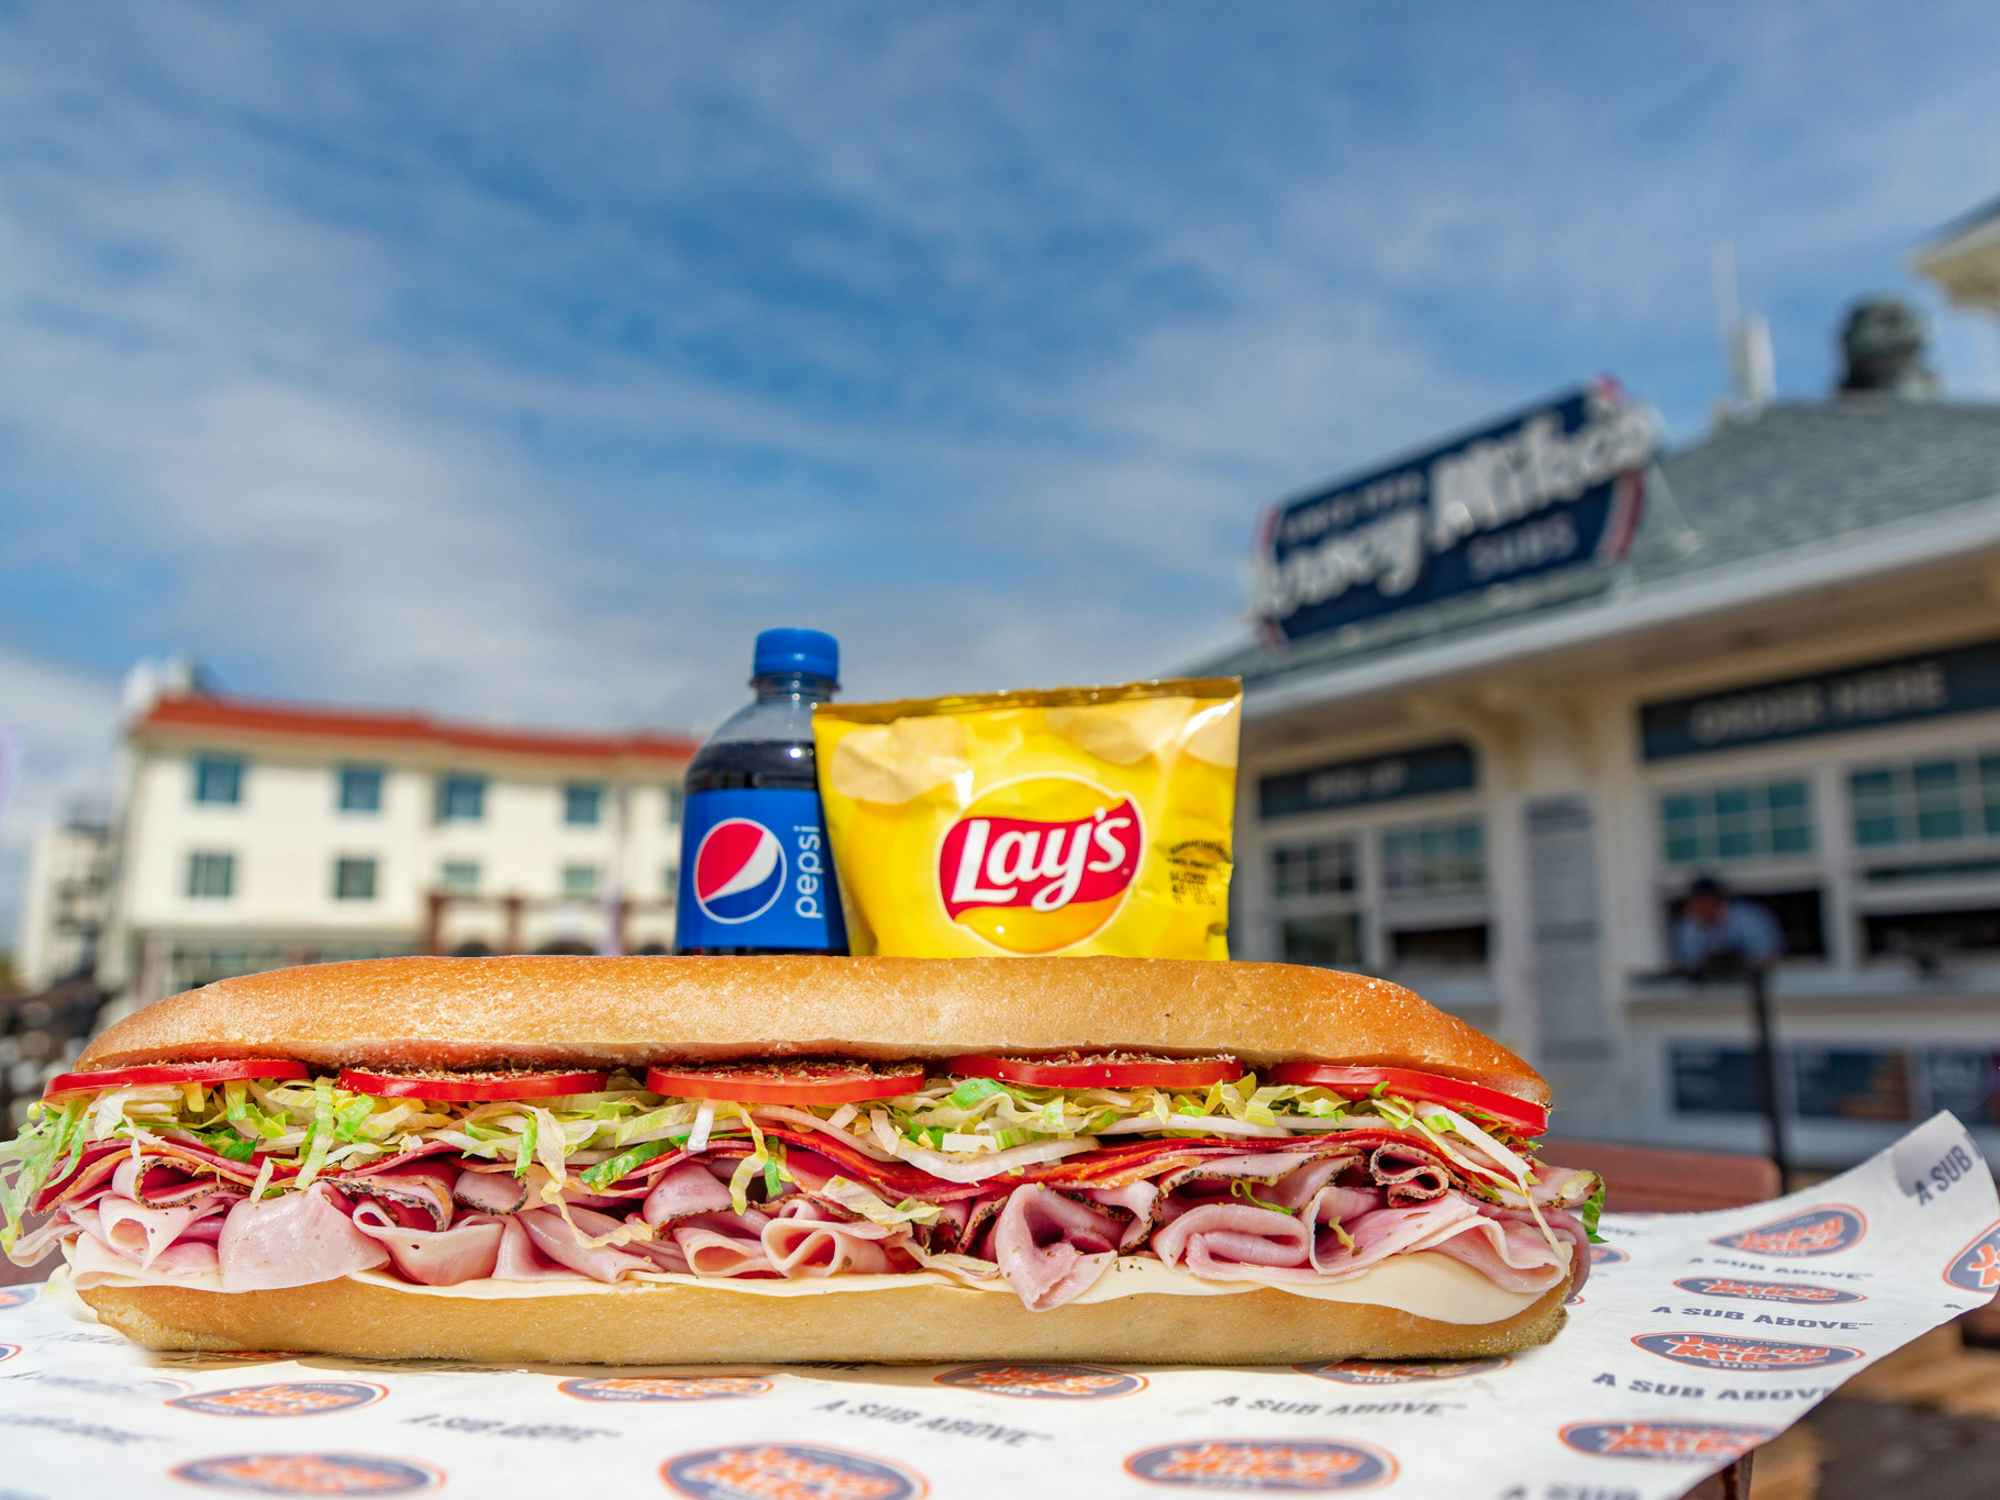 A Jersey Mike's sub, chips, and drink on a table